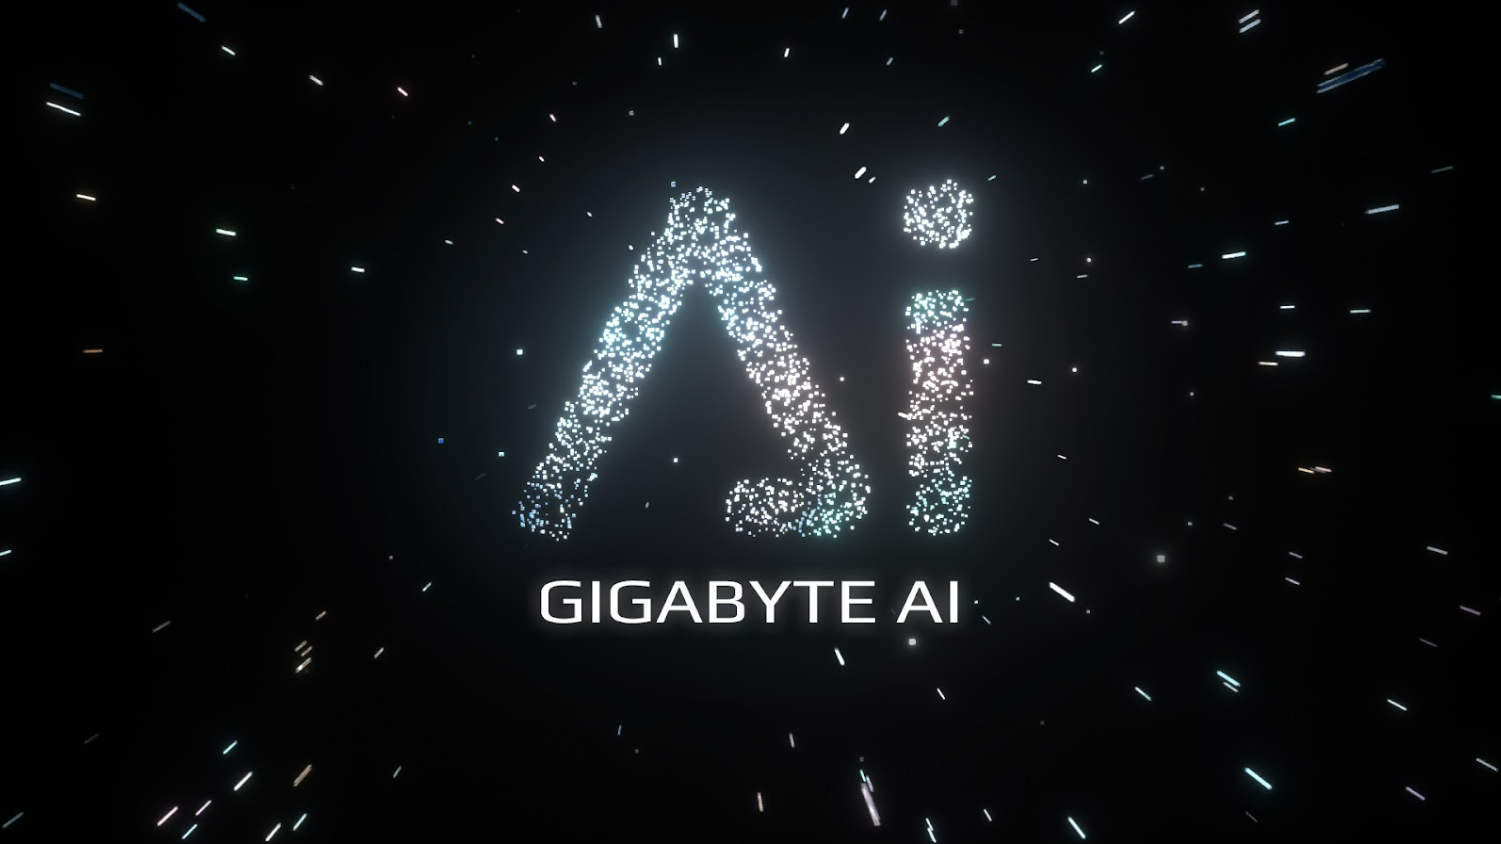 GIGABYTE Announces AI Strategy for Consumer Products to Map the Future of AI